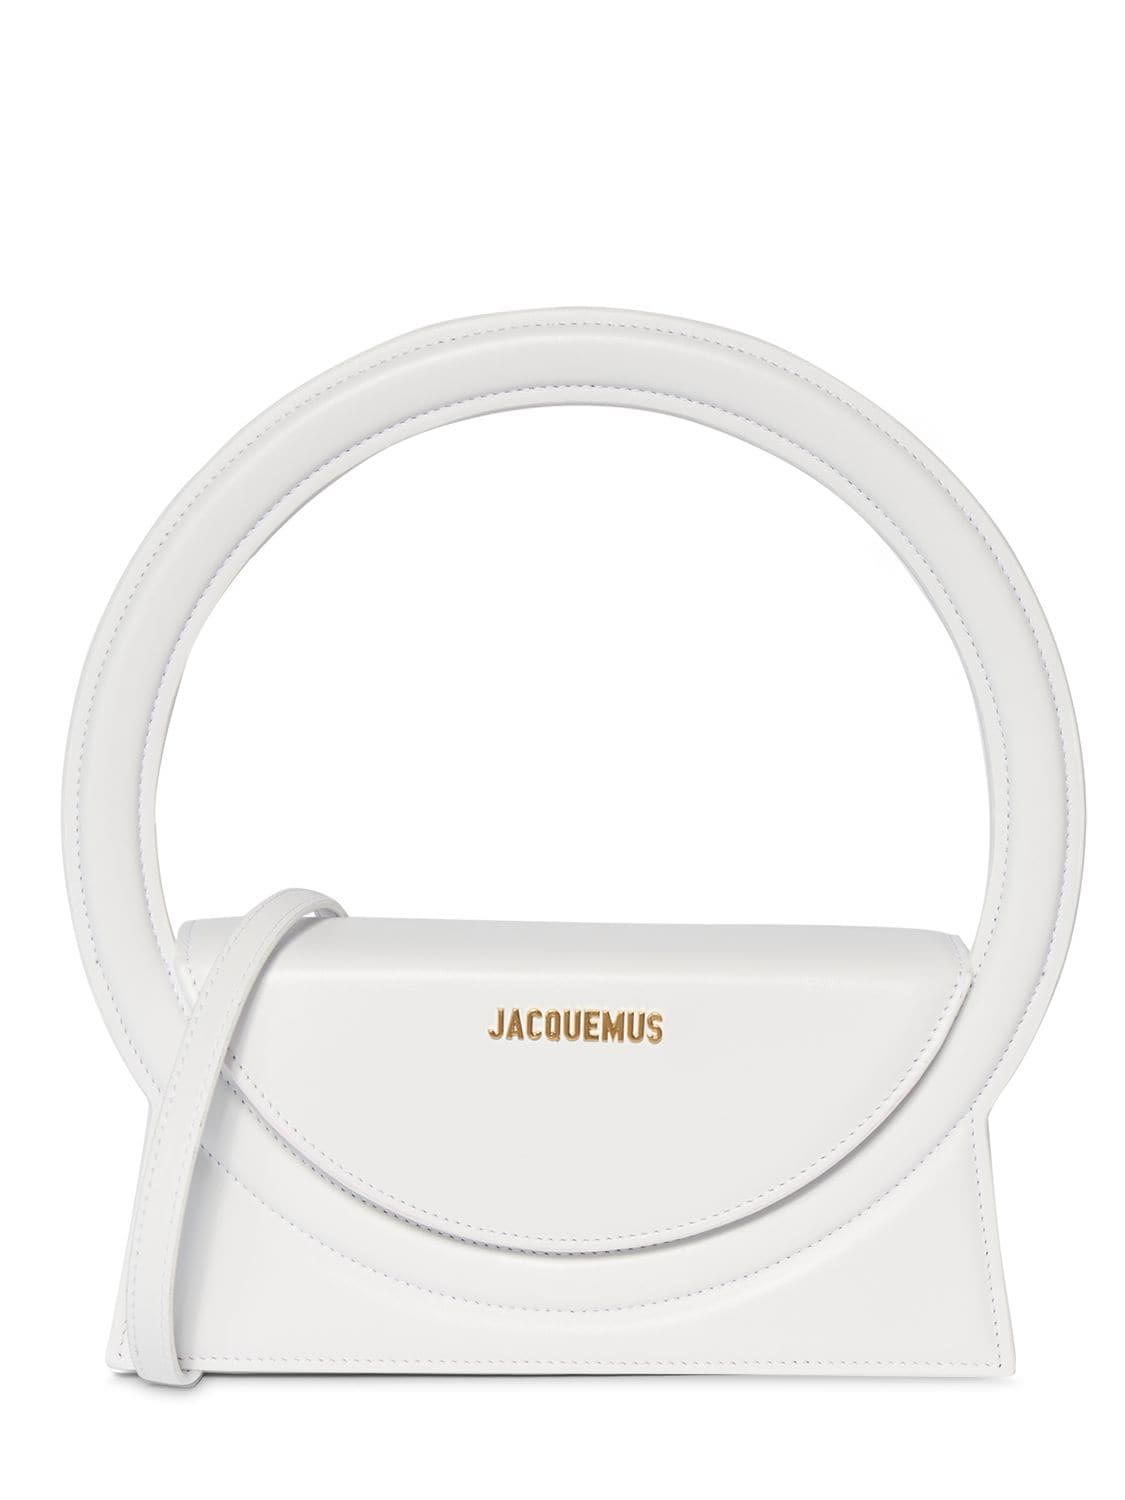 Jacquemus Le Sac Rond Leather Top Handle Bag In White